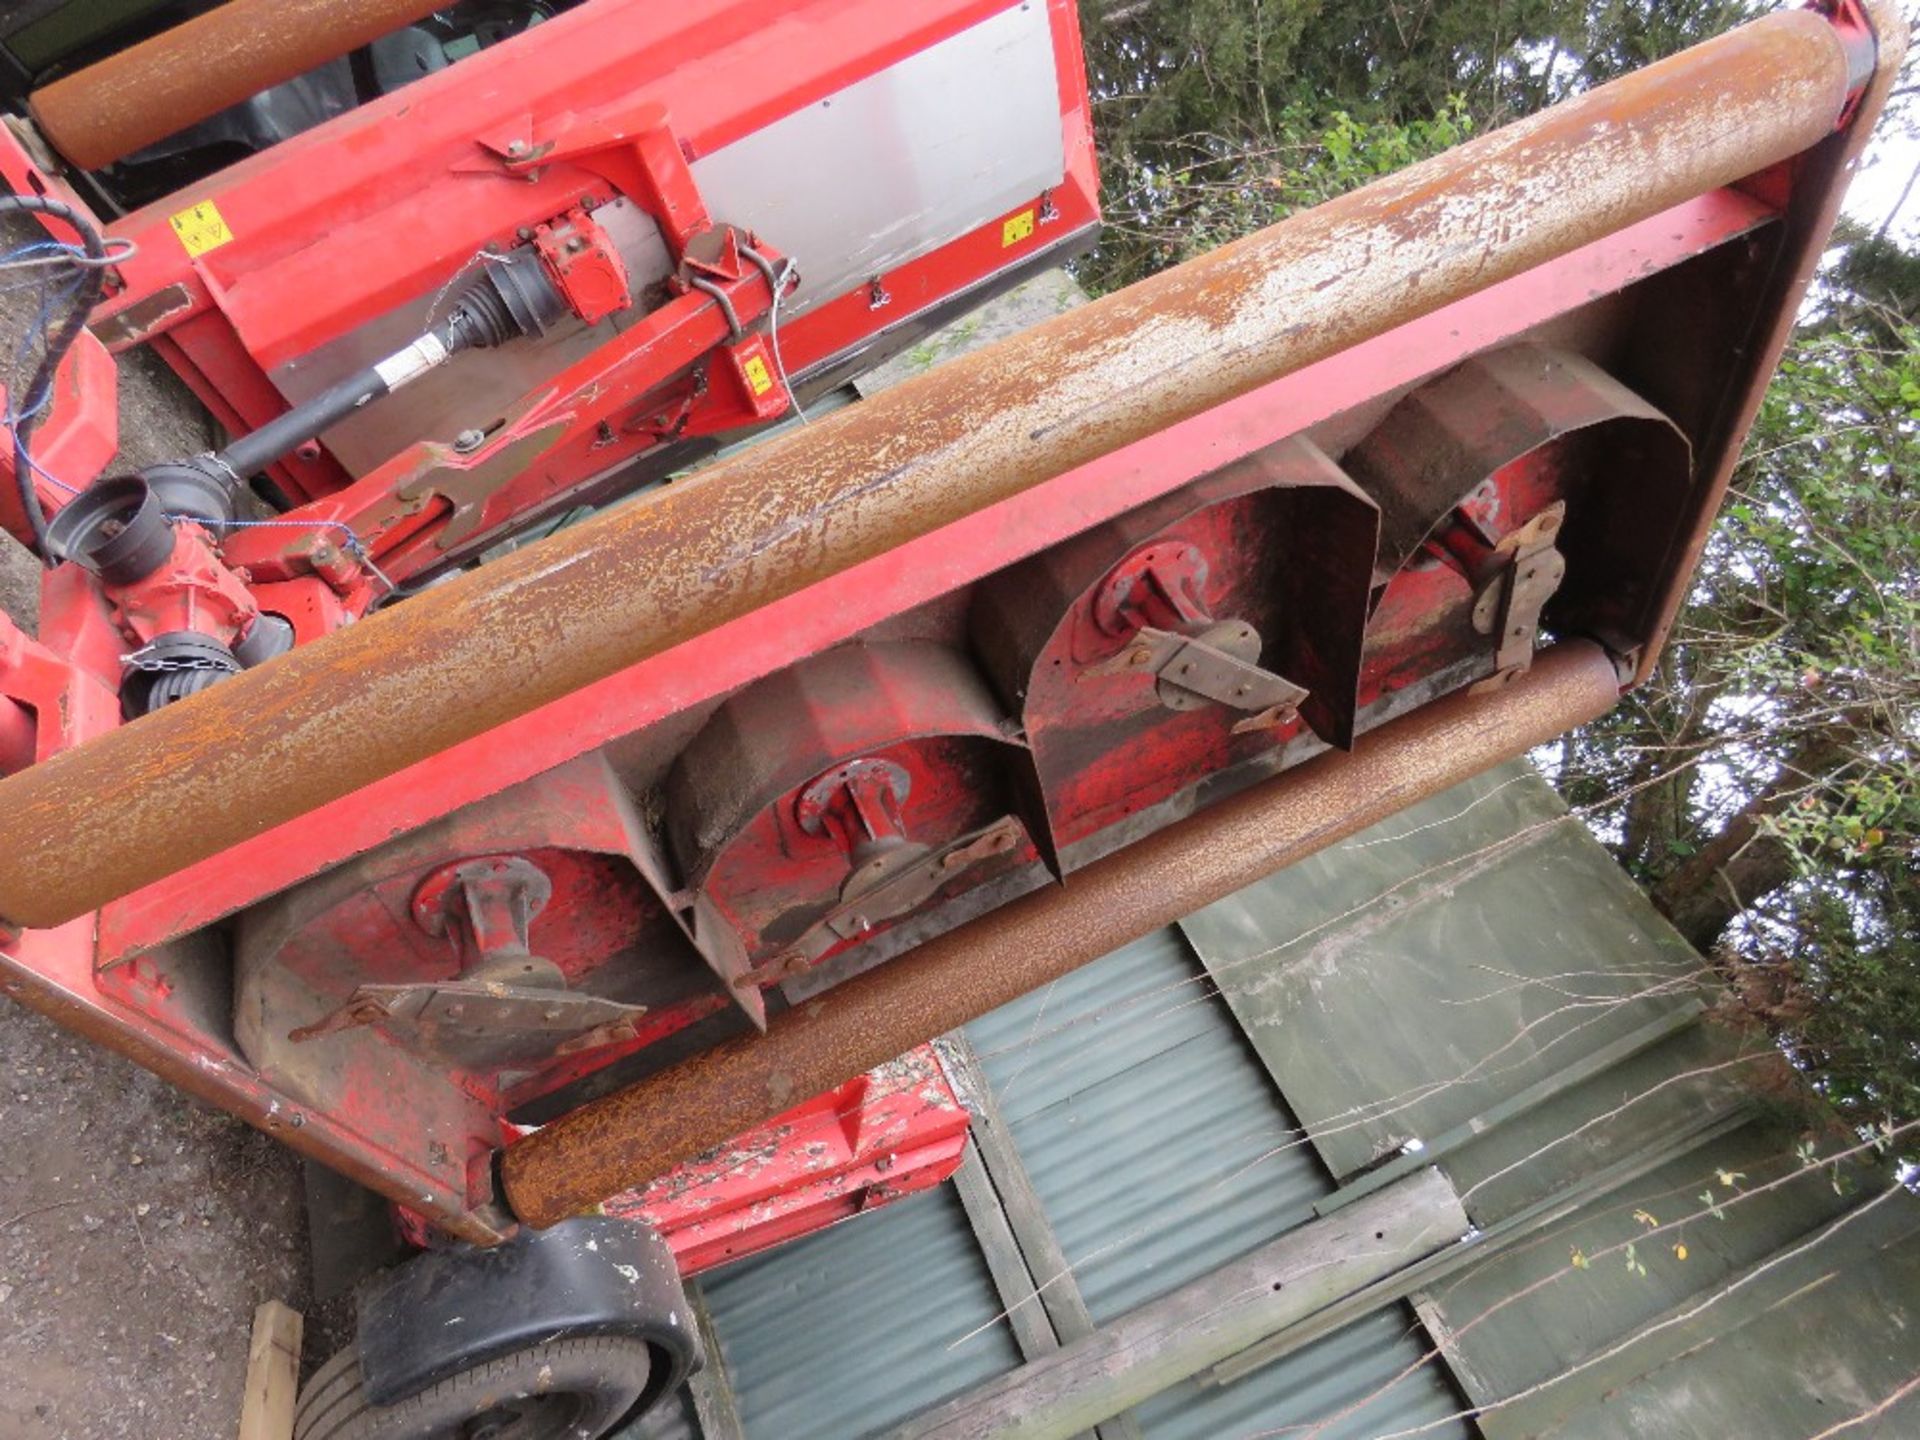 TRIMAX 728-610-400 BATWING TYPE ROLLER MOWER, YEAR 2017. PEGASUS S3 HEADS. NB: REQUIRES SOME REPAIR - Image 4 of 11